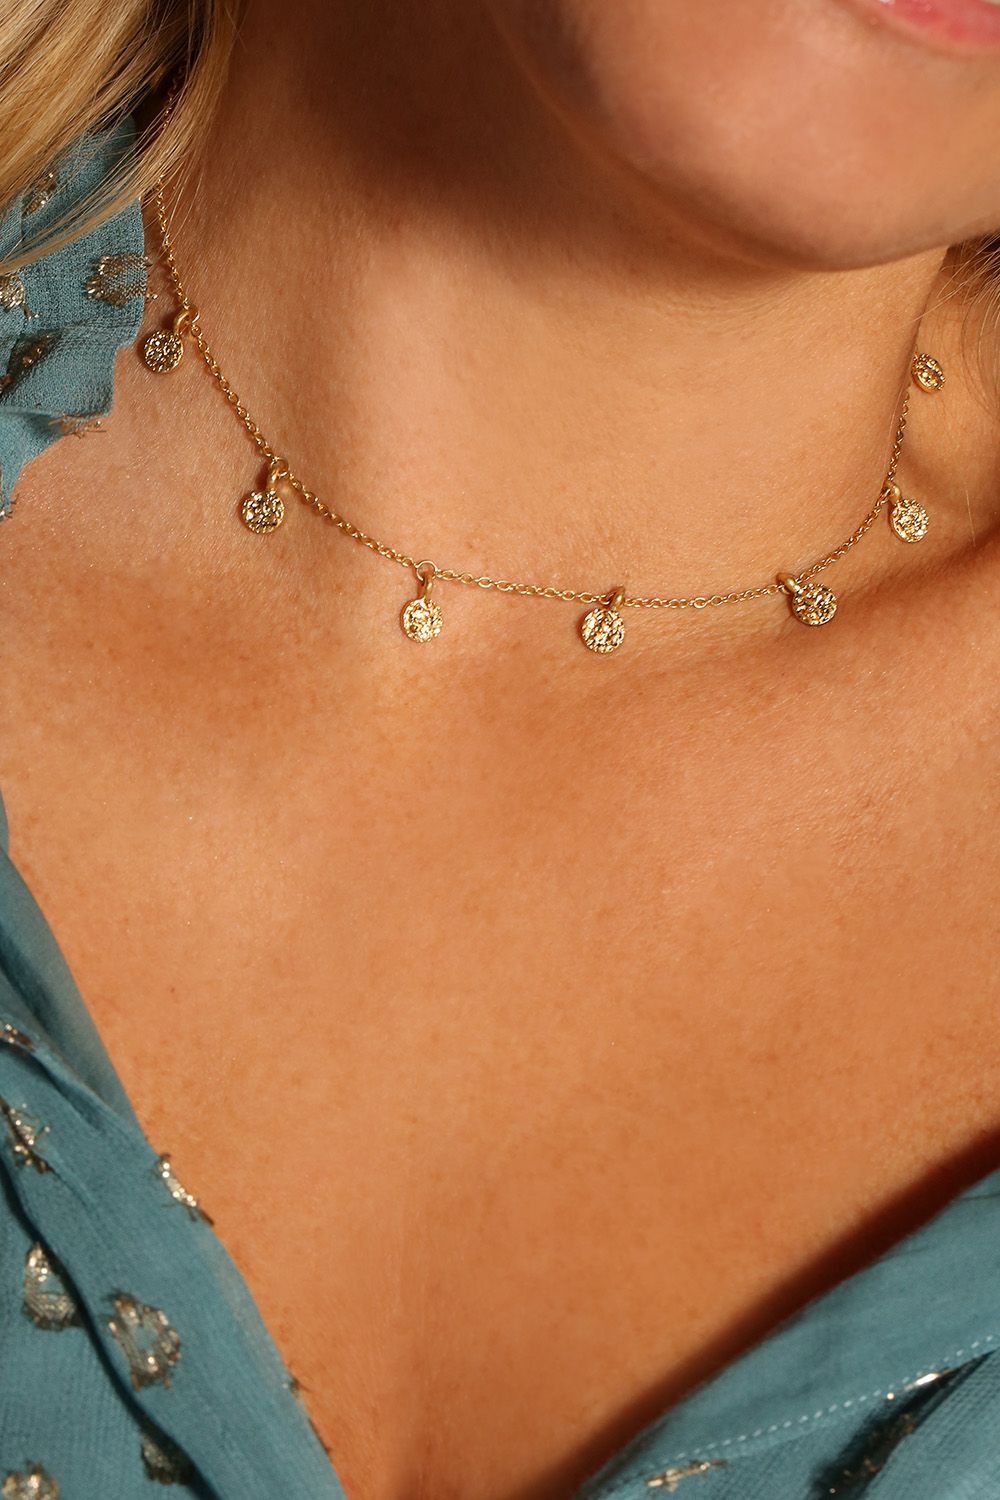 If you love your boho jewellery, this one's for you. It features a dainty gold choker with miniature coins that dance across your neck! The gold plated necklace features hammered gold detailing and looks amazing layered with another longer necklace with a low neckline outfit, or over the top of a jumper during the day! It measures 15 inches and comes with a lobster clasp fastening and 3 inch extender. The Boho choker necklace is designed by Kate Thornton as a classic piece that you can wear with so many looks!